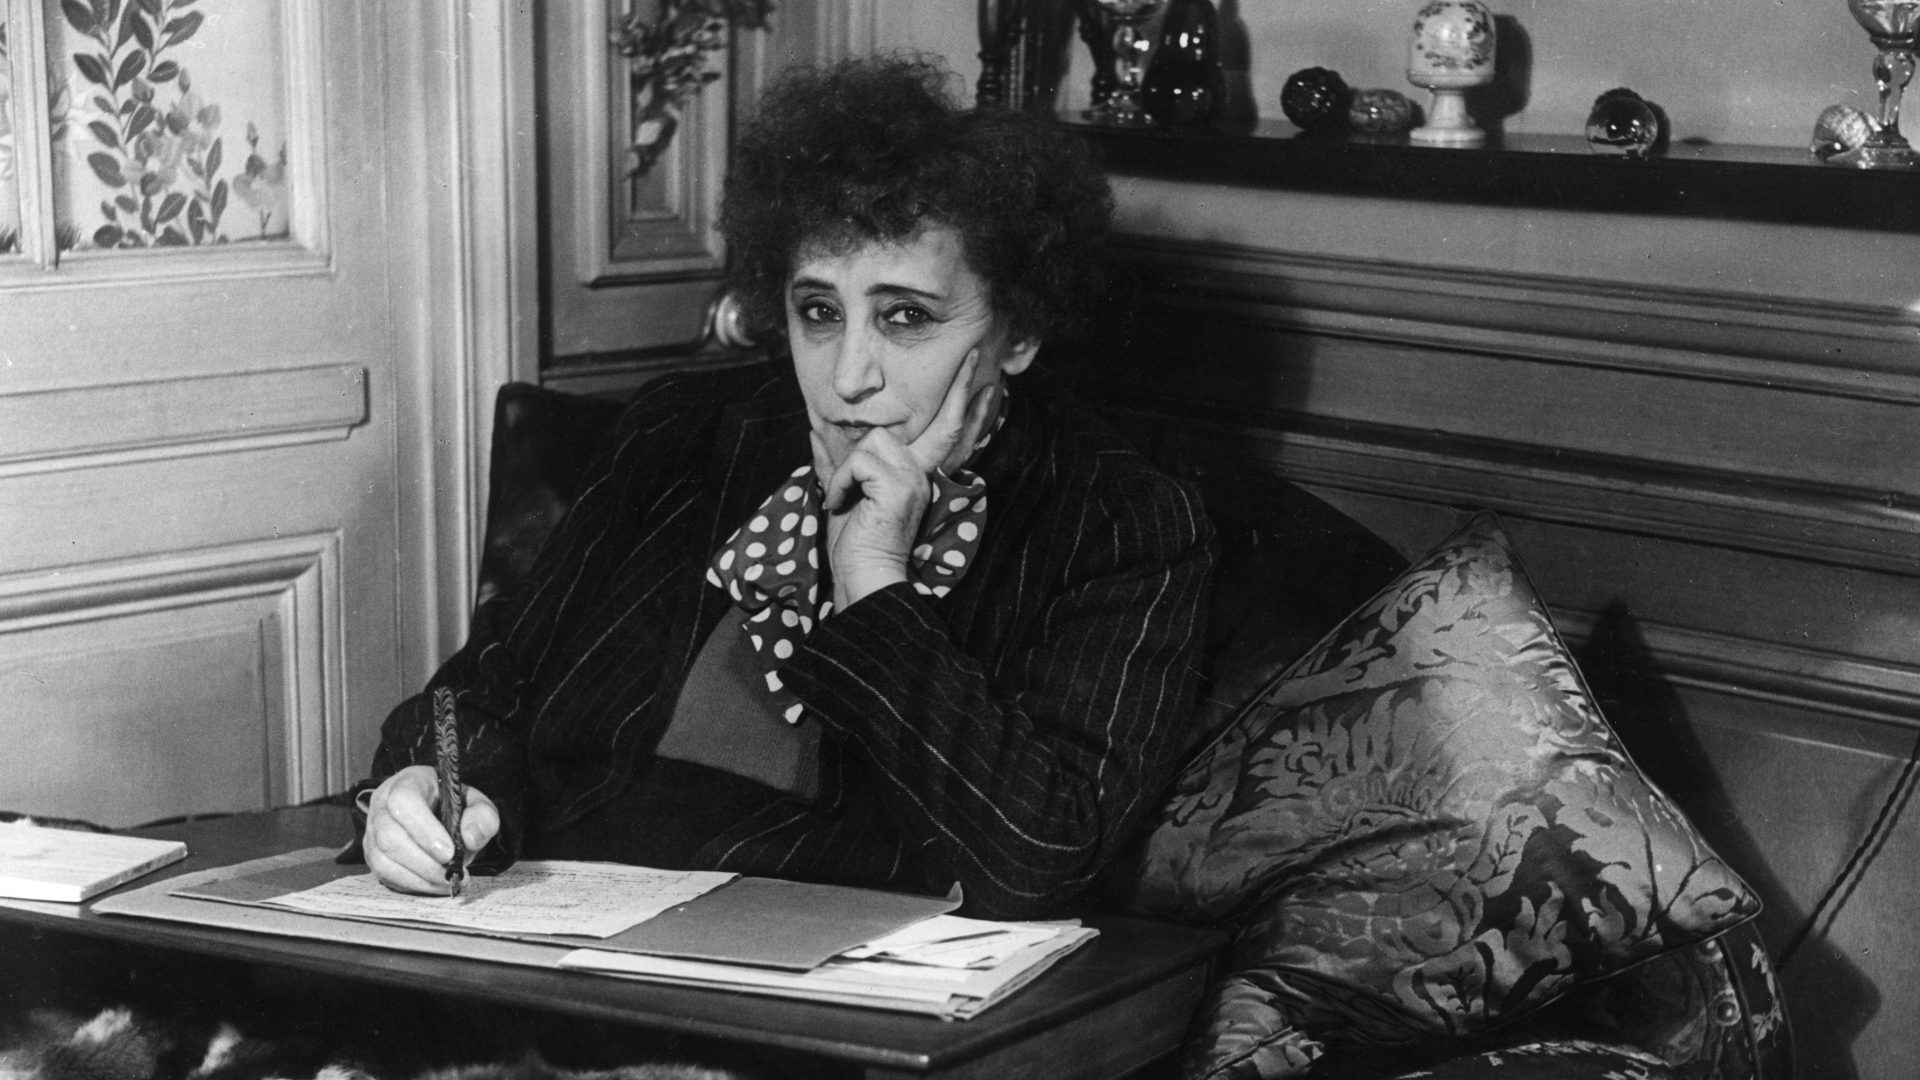 Short story queen Colette (Sidonie-Gabrielle Colette) at home in Paris, circa 1940. Photo: Hulton Archive 